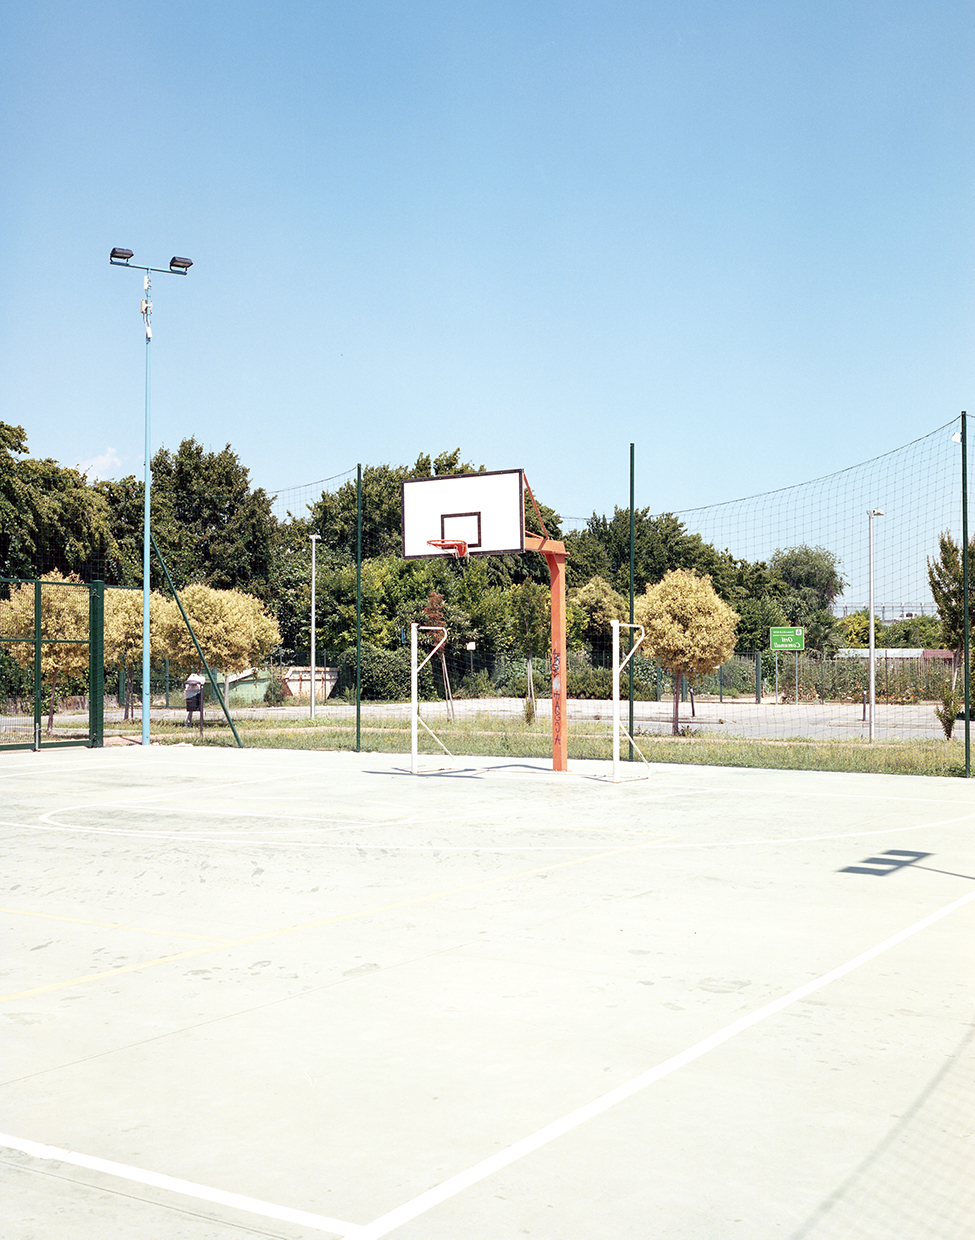  Creazzo, 2018, Italy
Basketball field in the courtyard of the local high school 